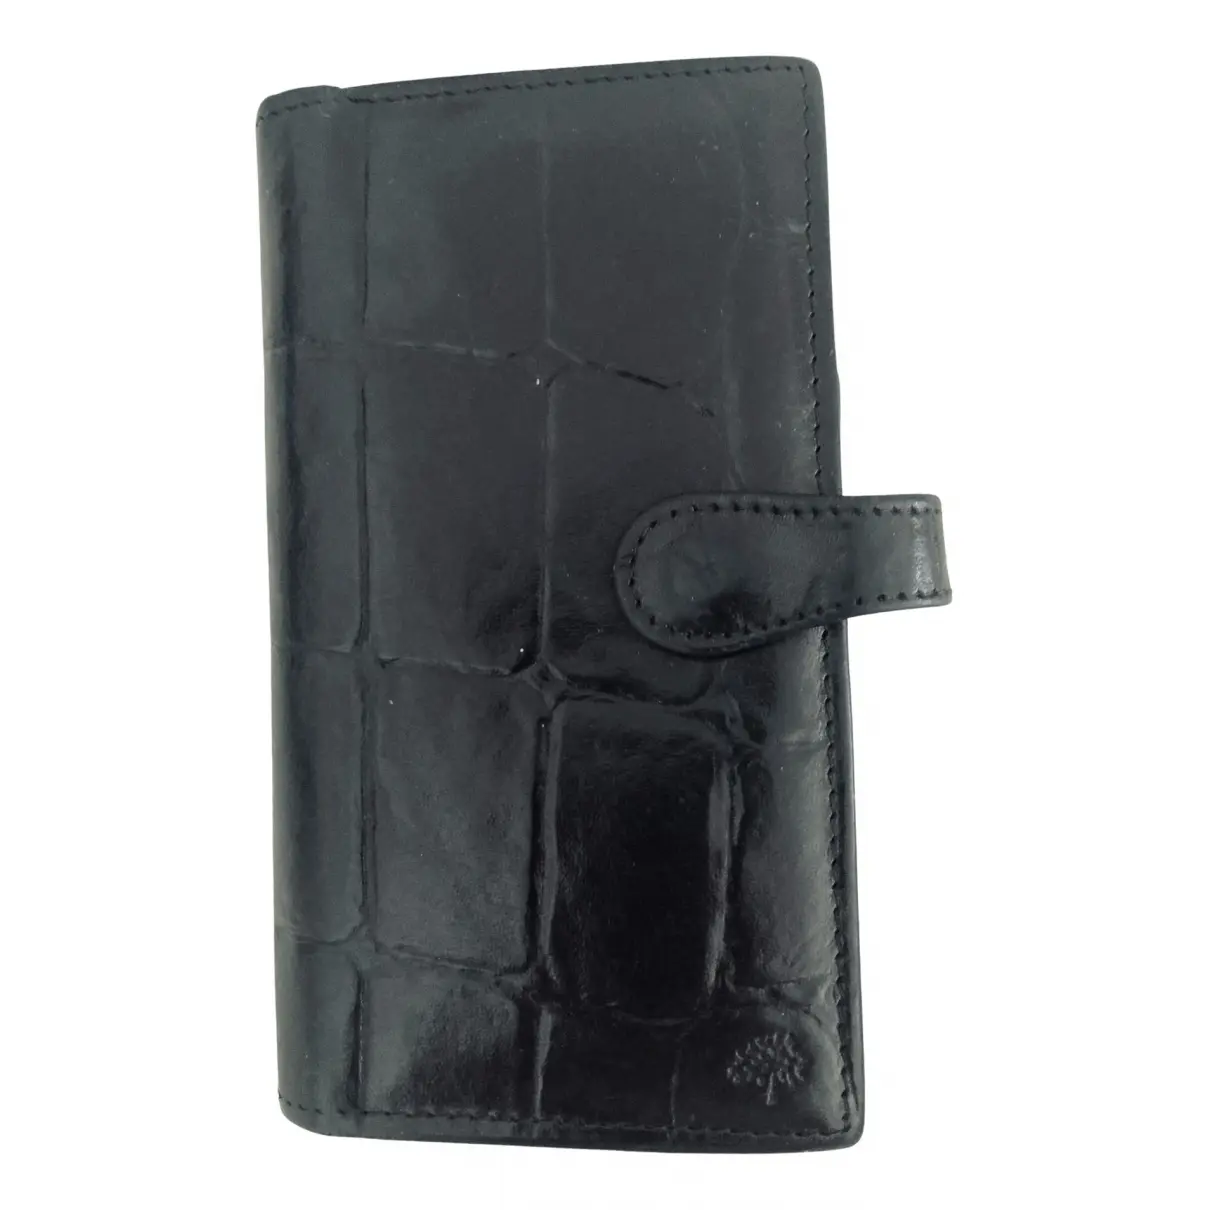 Leather wallet Mulberry